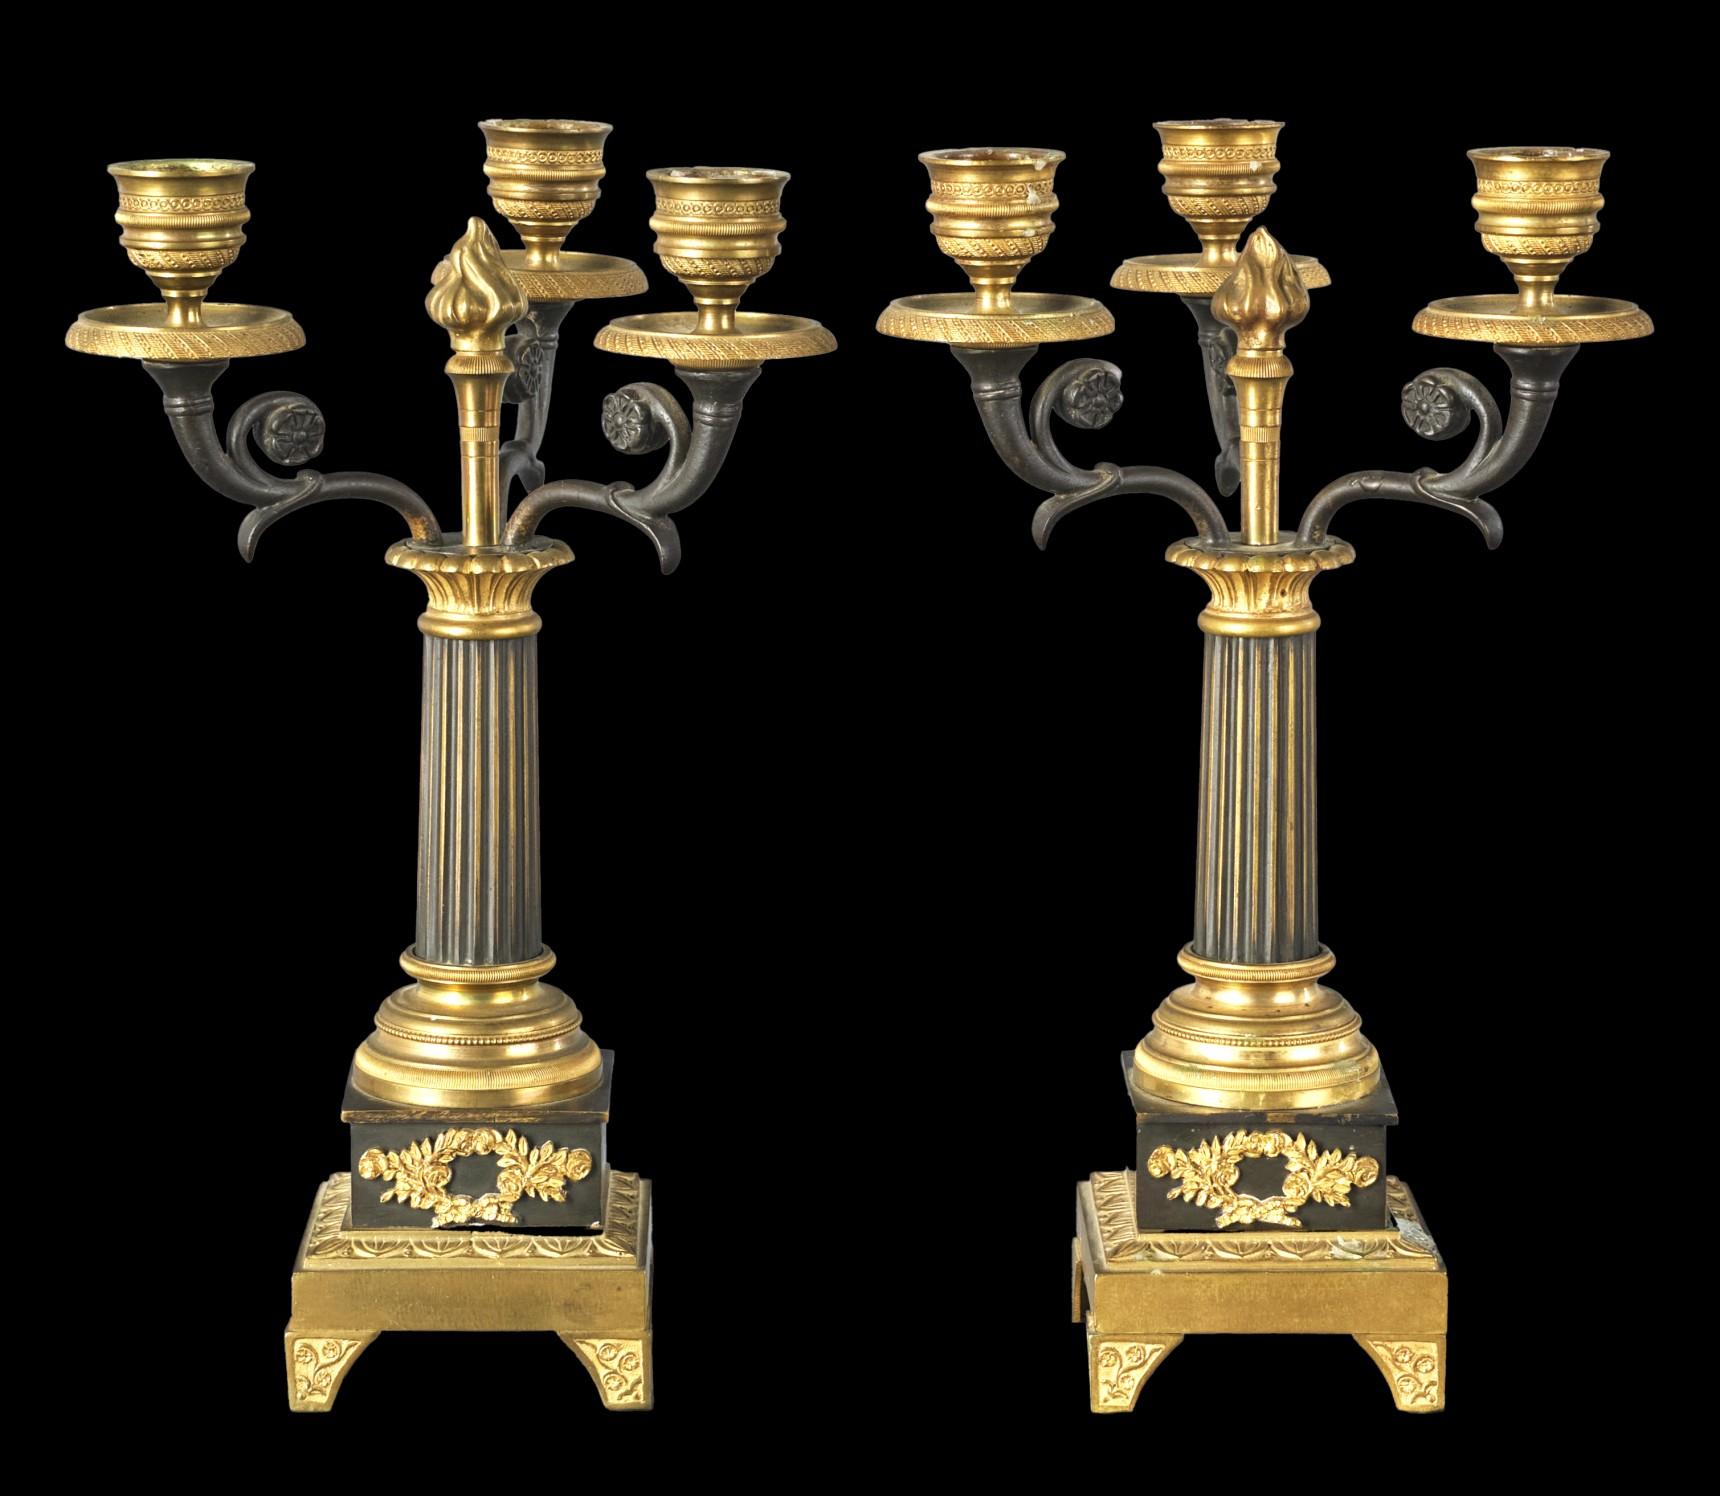 A very fine pair of early 19th century Empire Period patinated & parcel gilt bronze three branch candelabra. Both showing a trio of finely cast scrolled & foliate shaped branches fitted with richly gilded nozzles & flattened bobeches, atop reeded